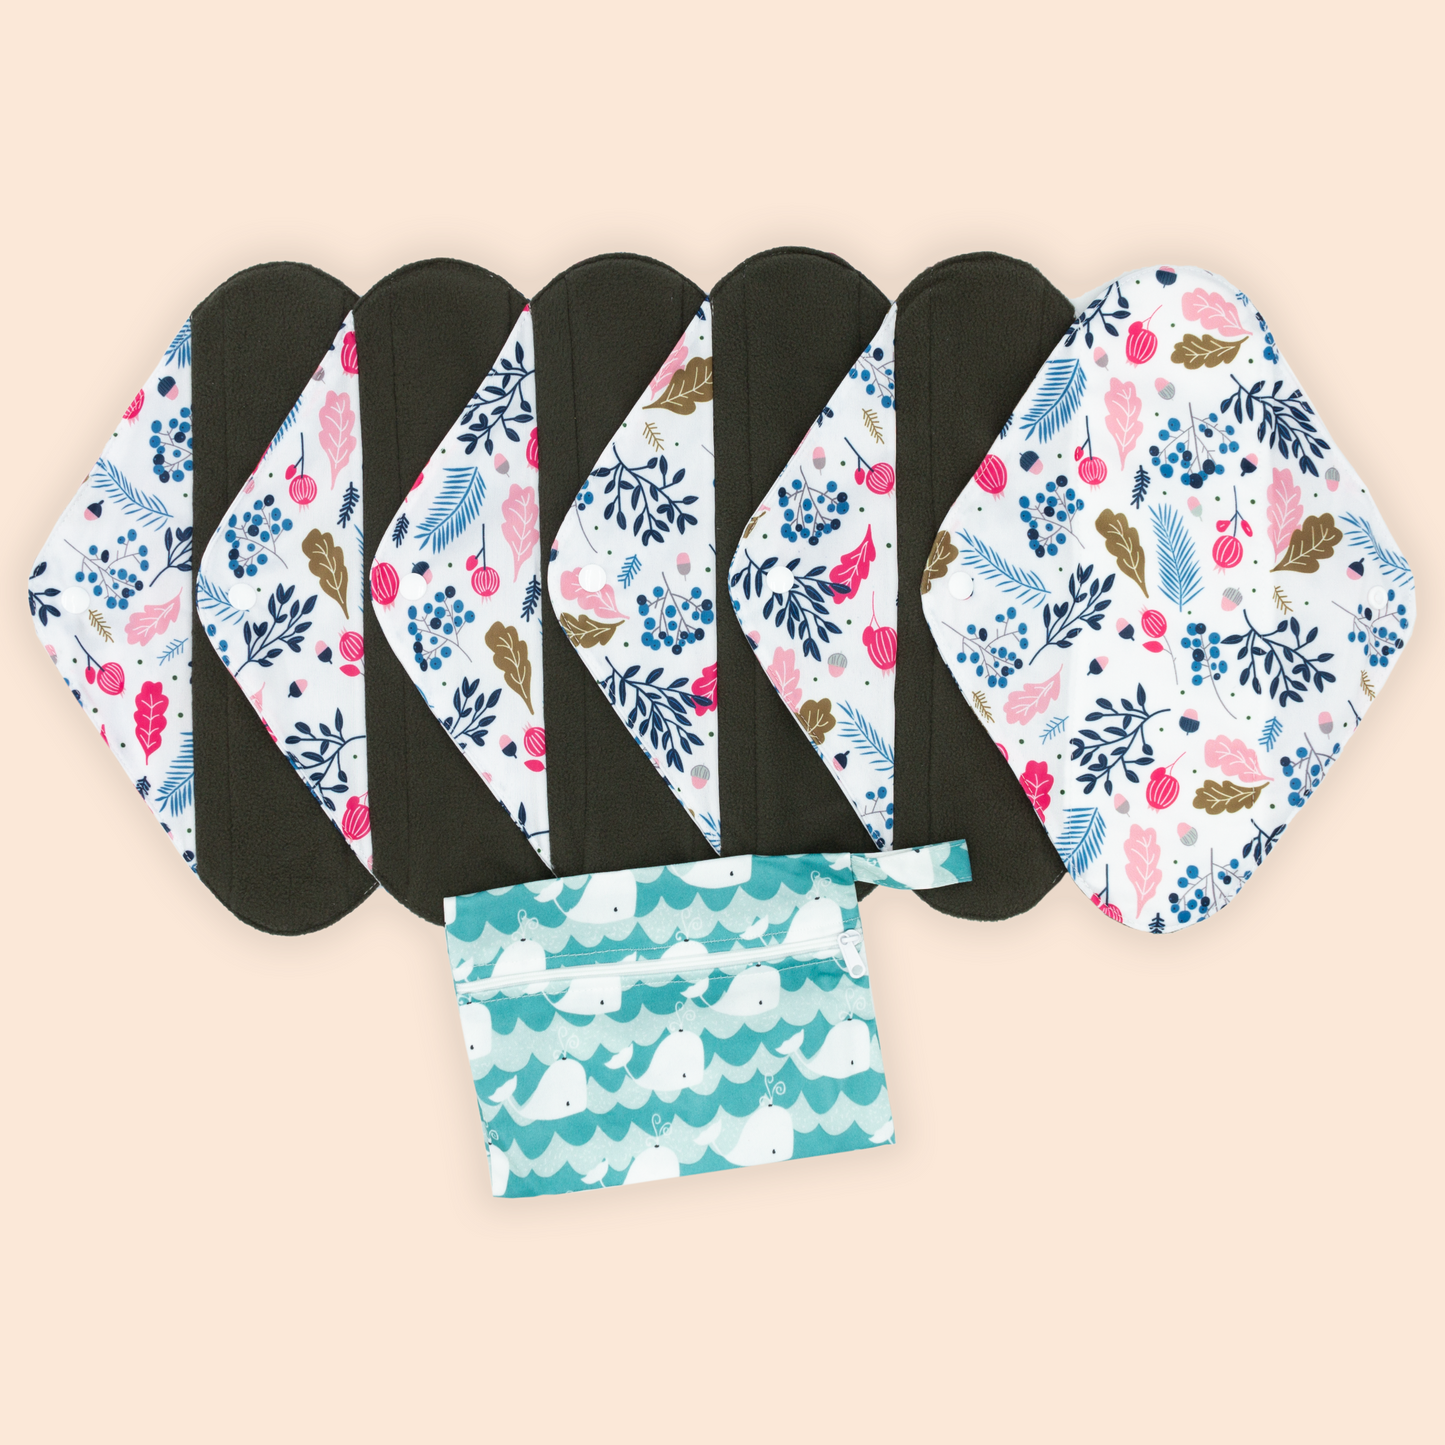 Pack of 6 Reusable Night Pads + Free Wet Bag | Fall Leafs